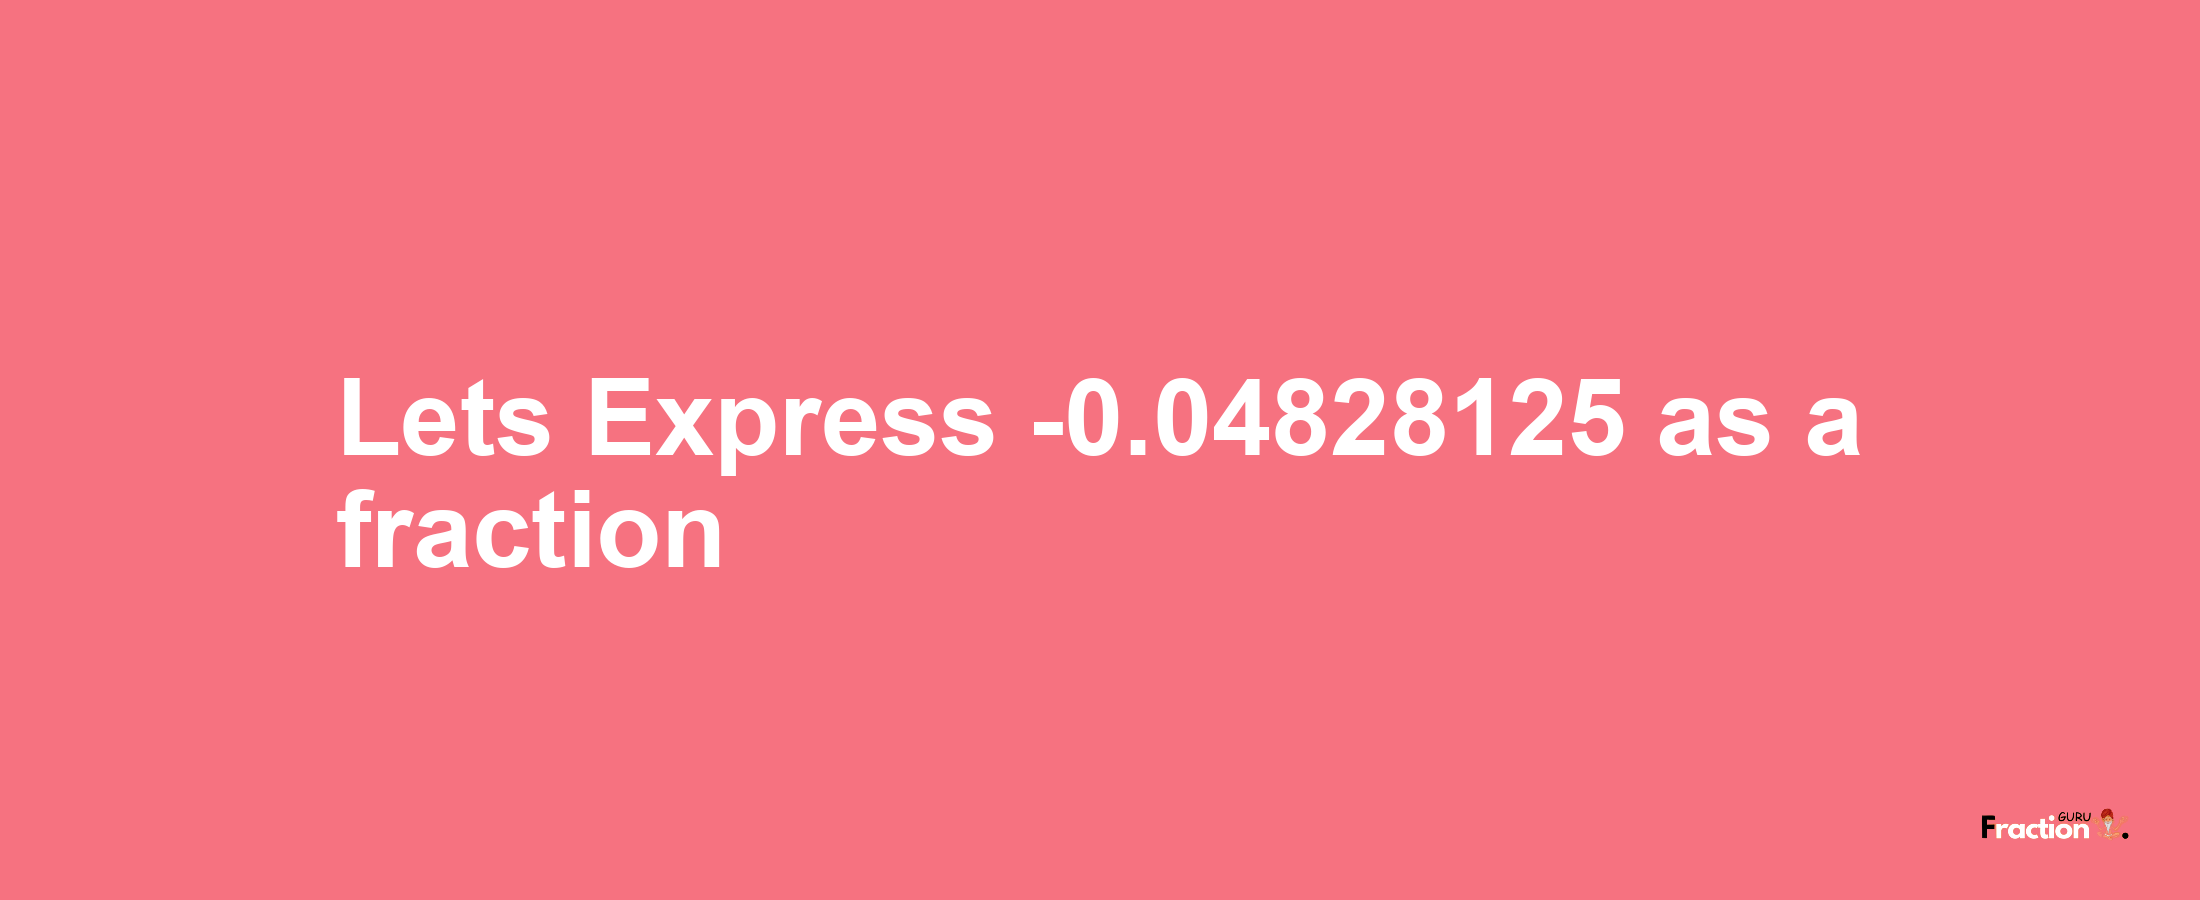 Lets Express -0.04828125 as afraction